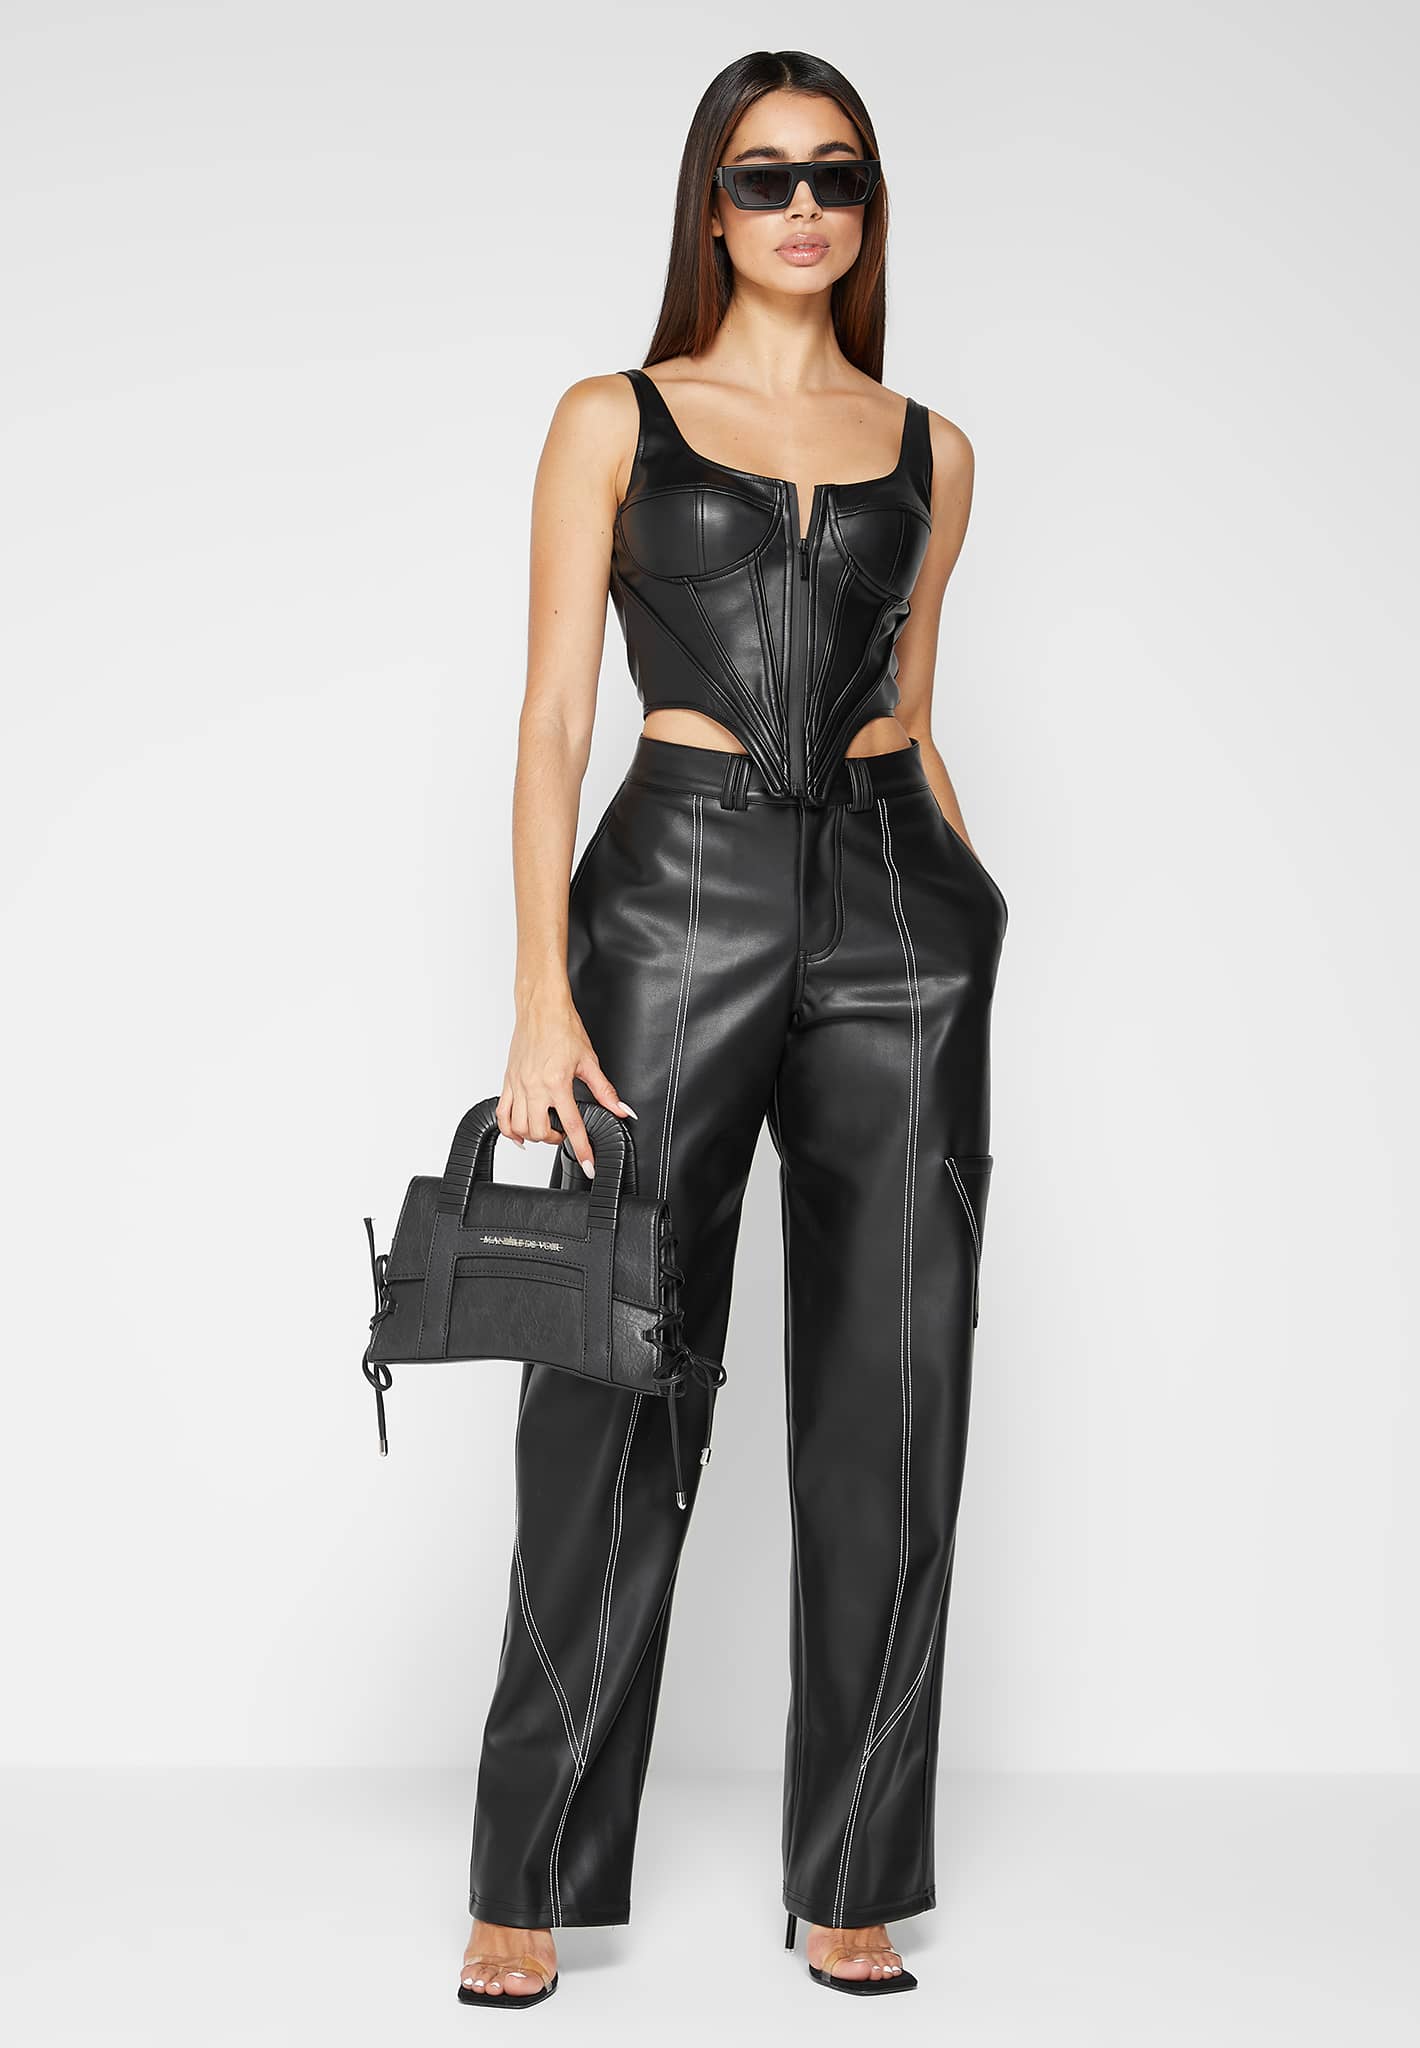 BREE Faux Leather Corset Top